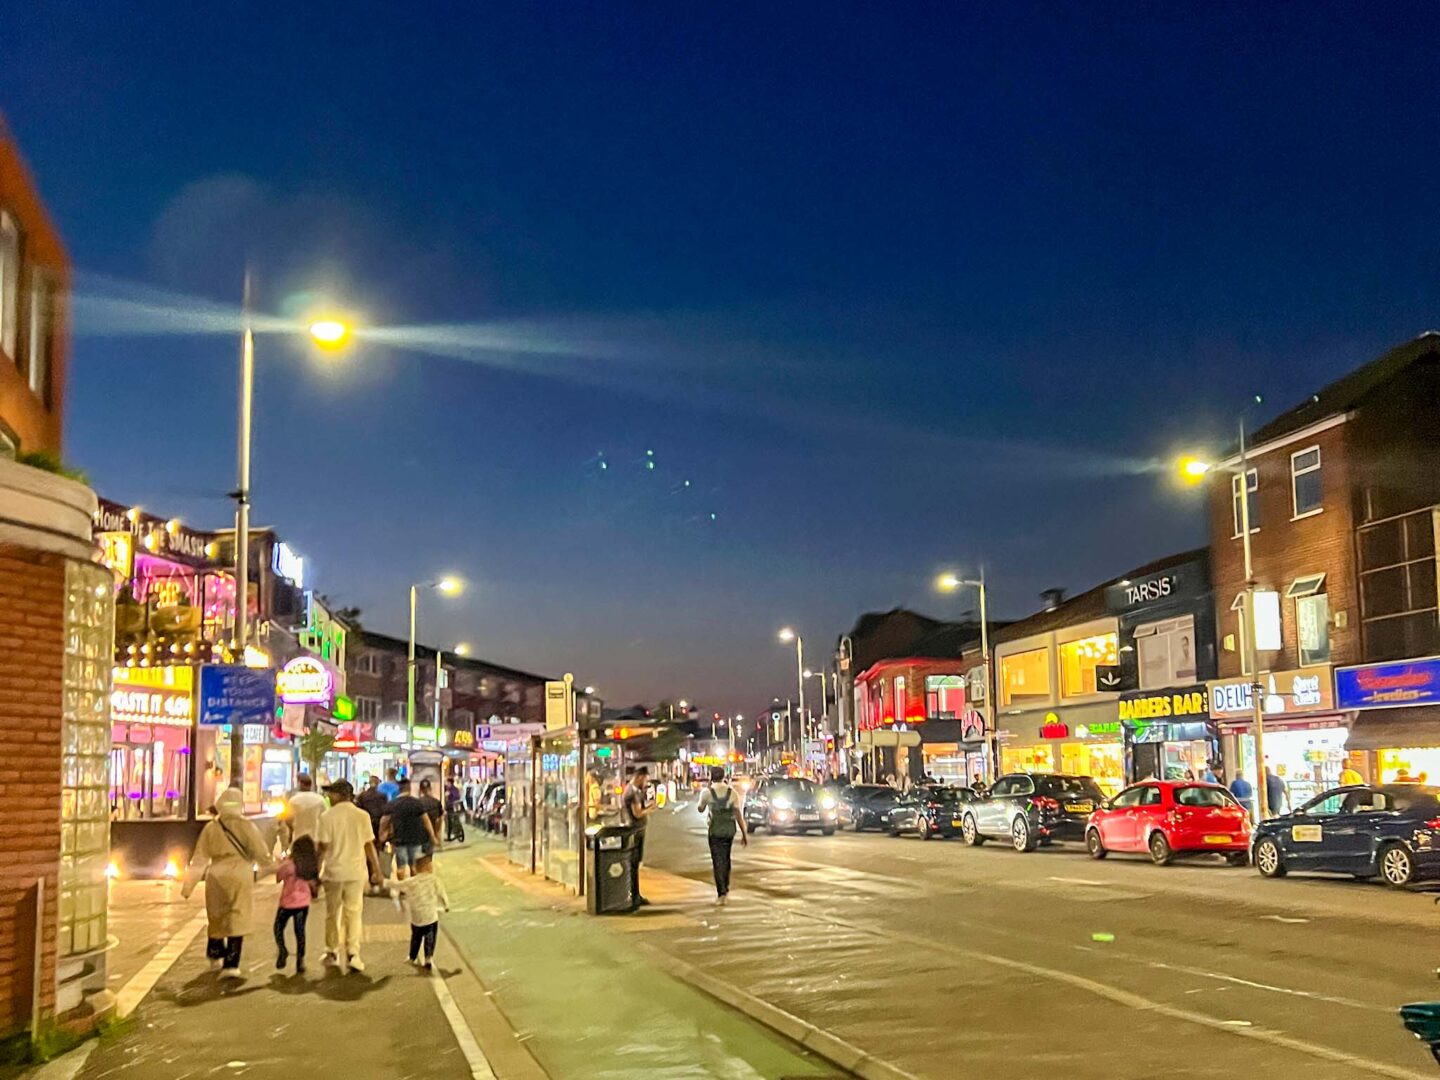 Wilmslow Road at night, Best curry mile restaurants,